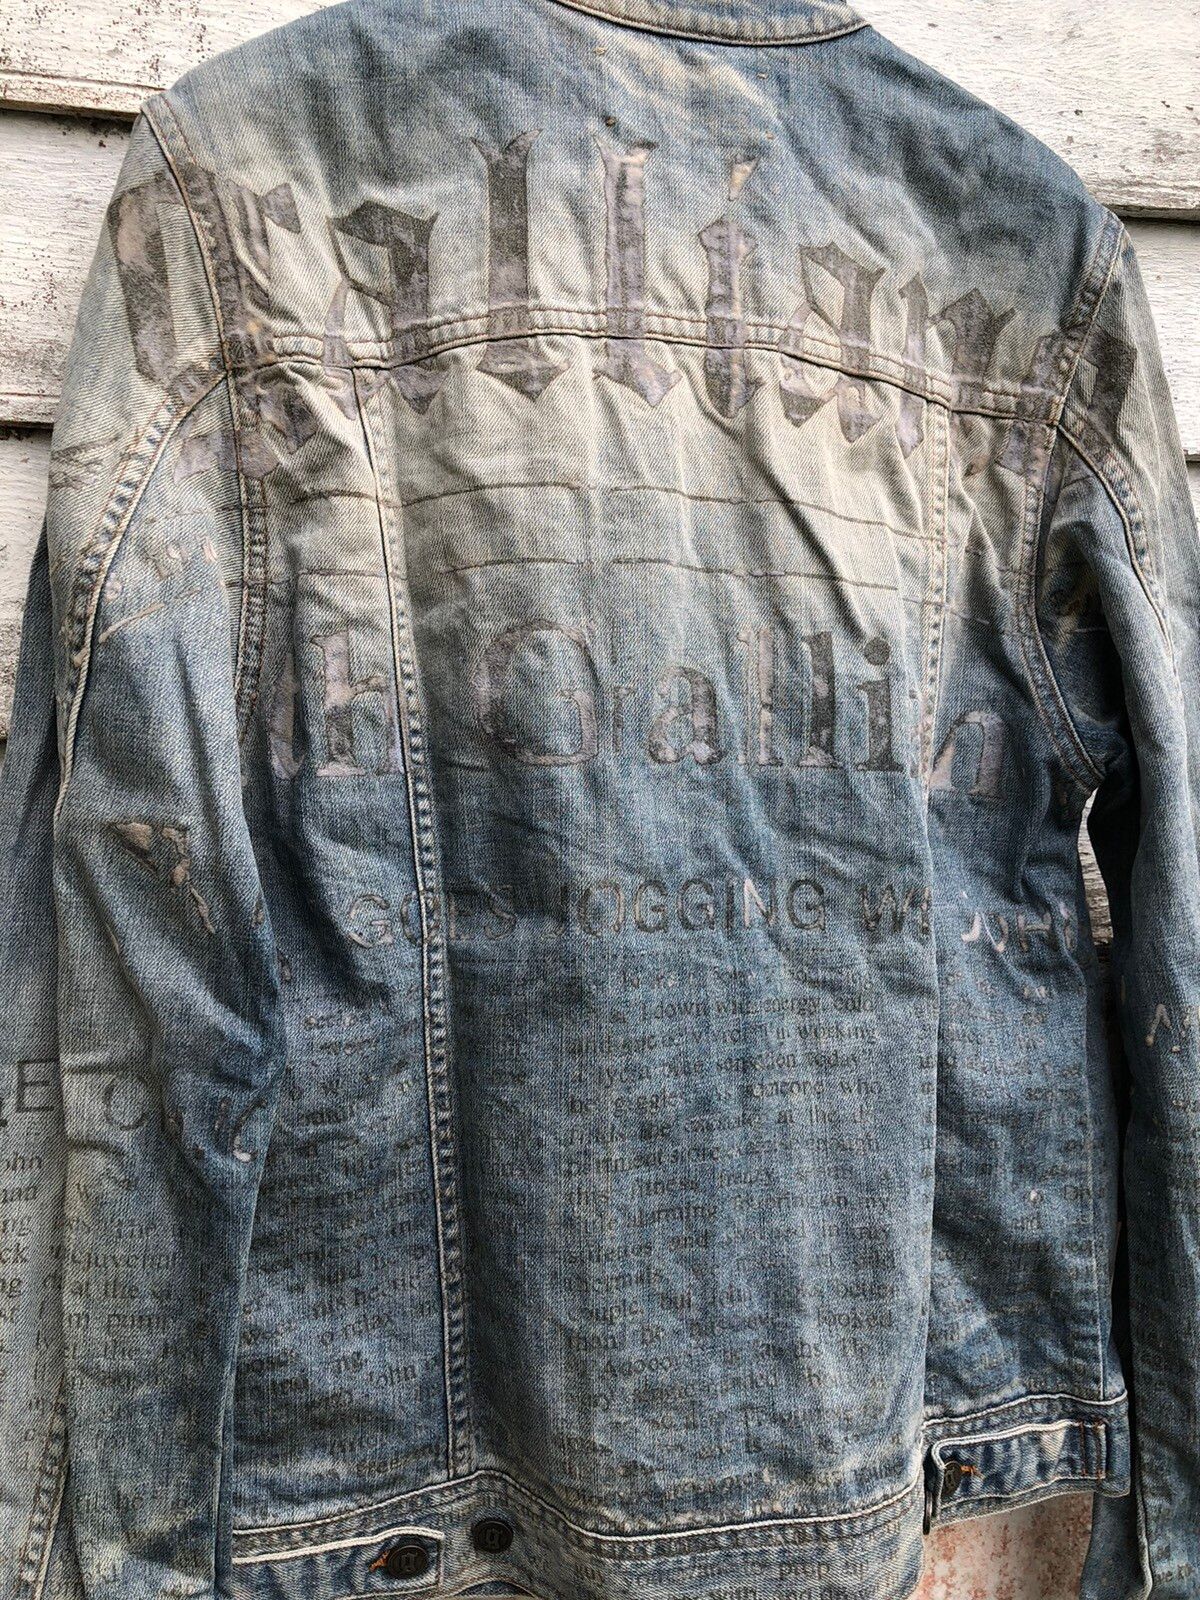 Archival Clothing Archived Galliano Poetic Printed Blue Washed Denim Trucker Size US M / EU 48-50 / 2 - 9 Thumbnail